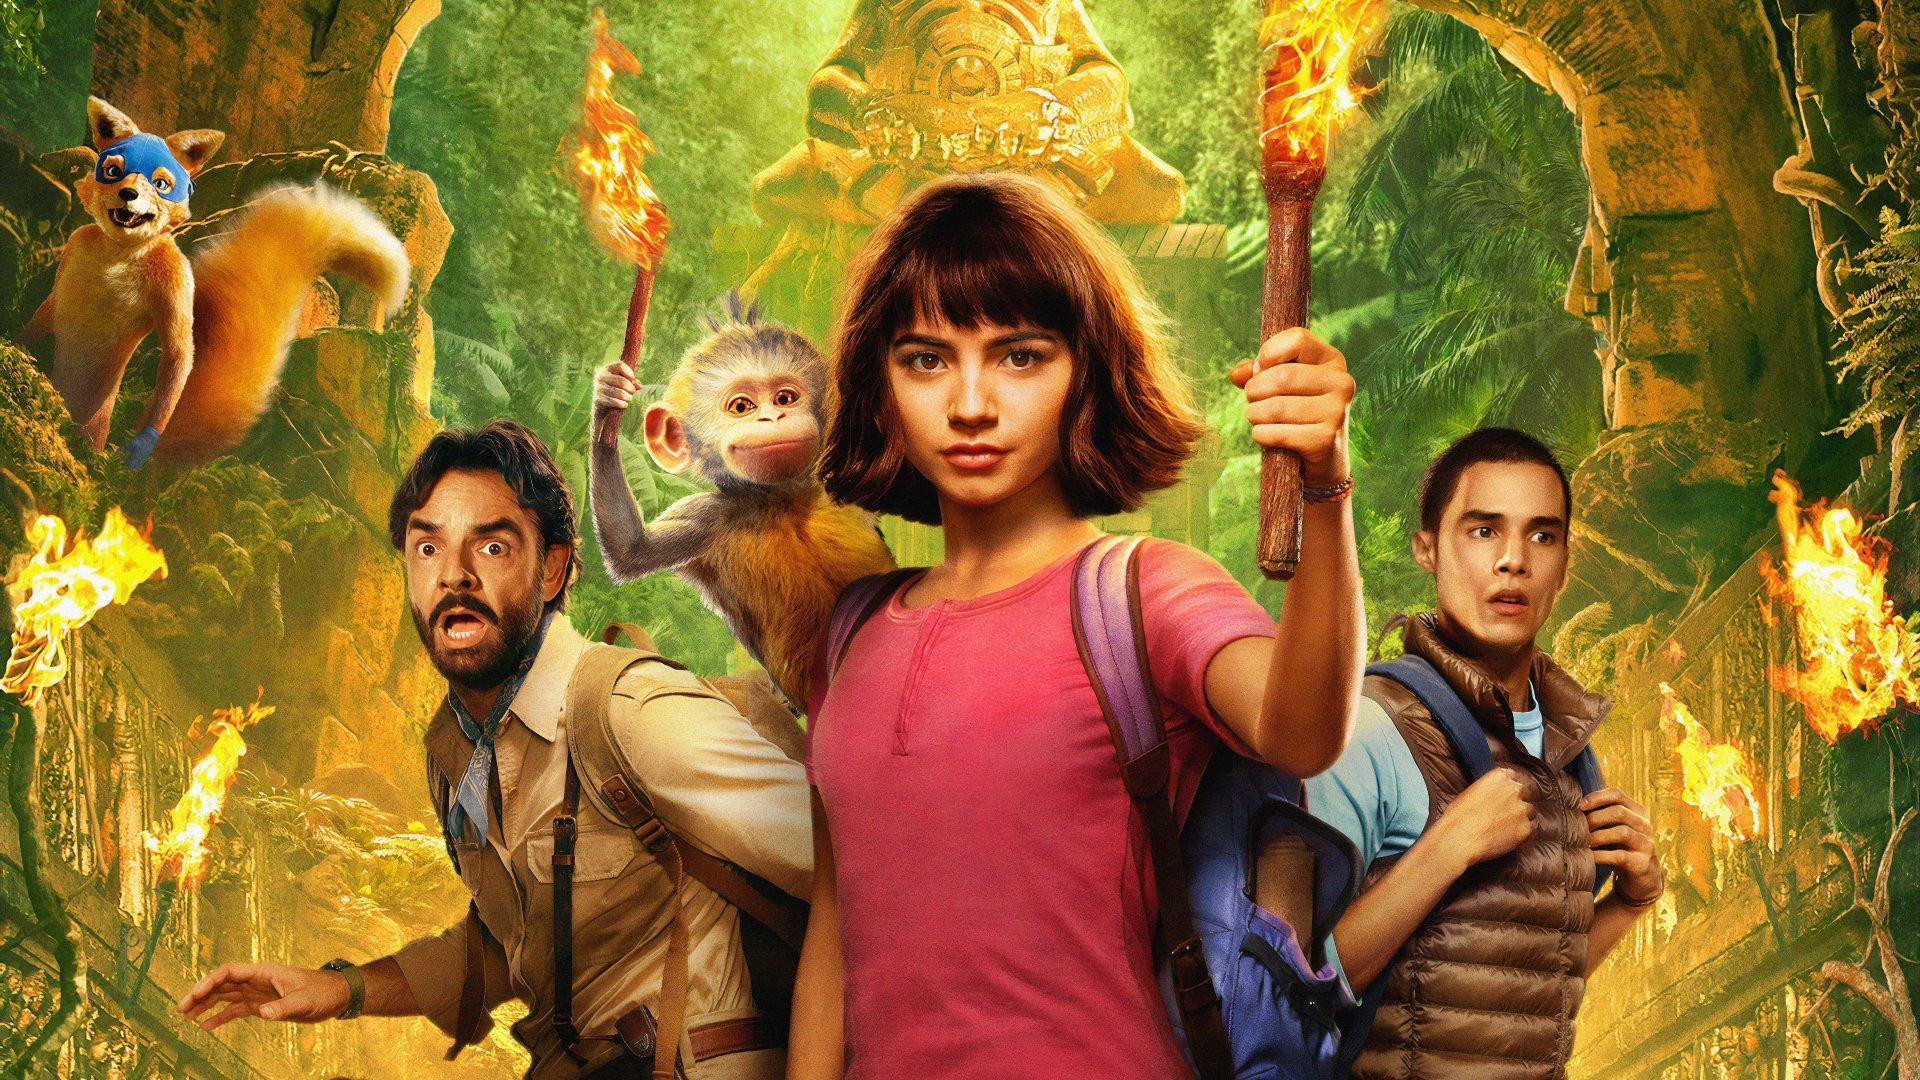 Dora and the Lost City of Gold 4k Ultra HD Wallpaper. Background